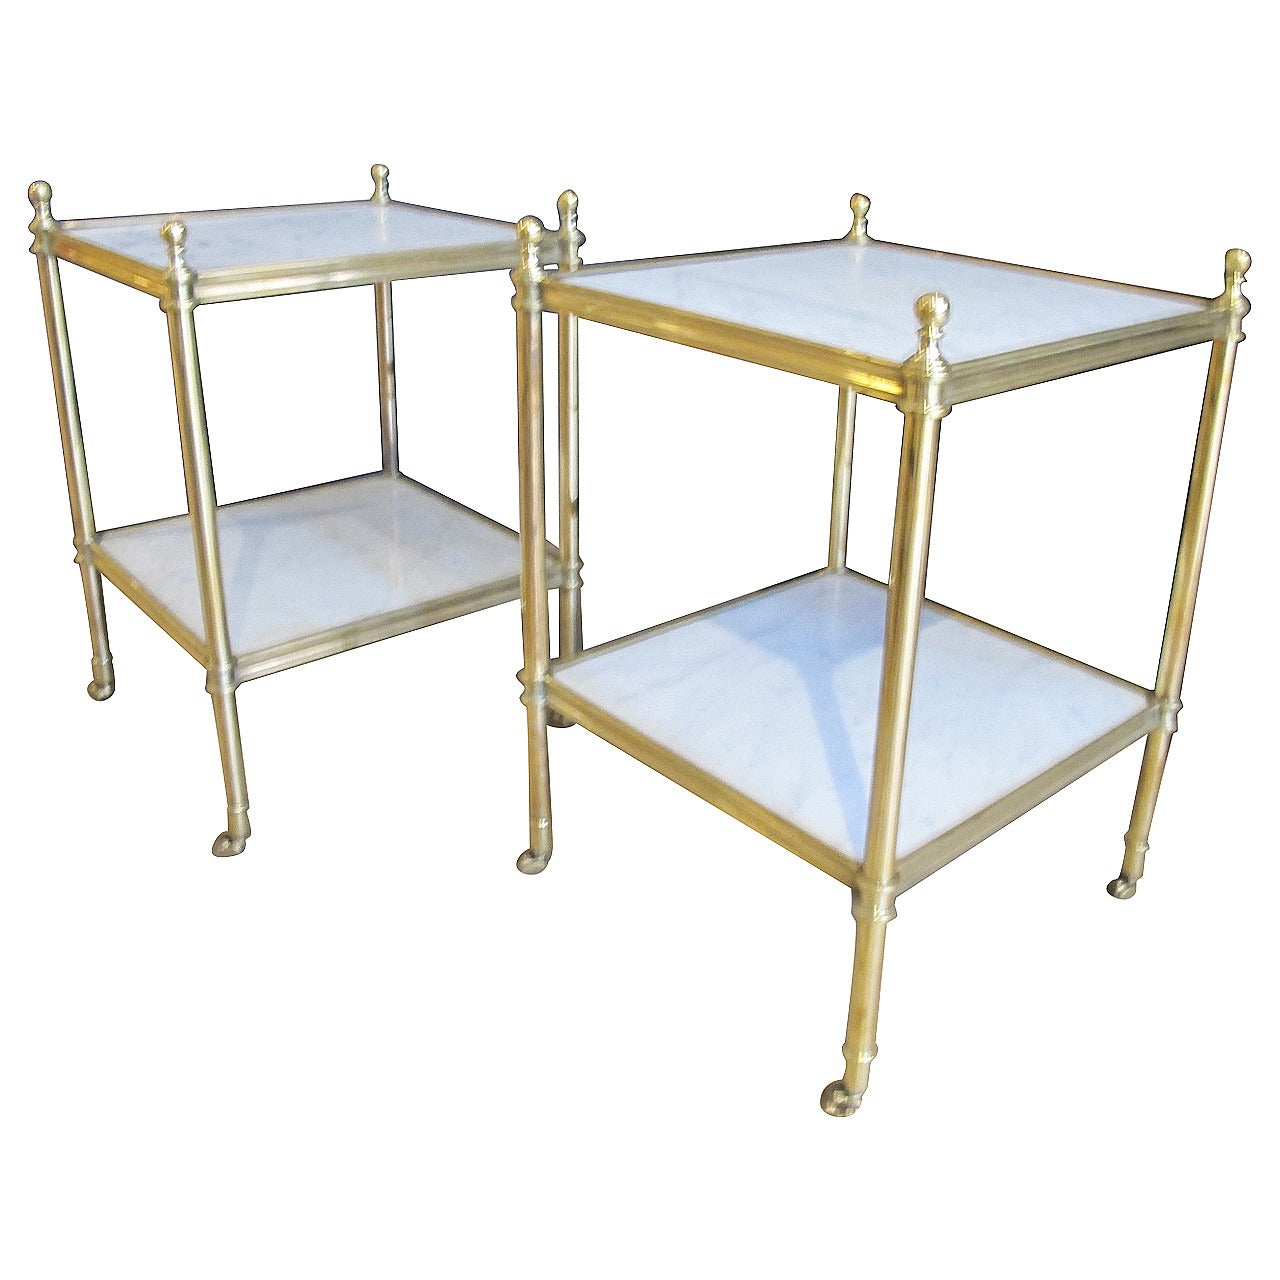 Very Good Quality Solid Cast Brass & Marble Side Tables, 1940s